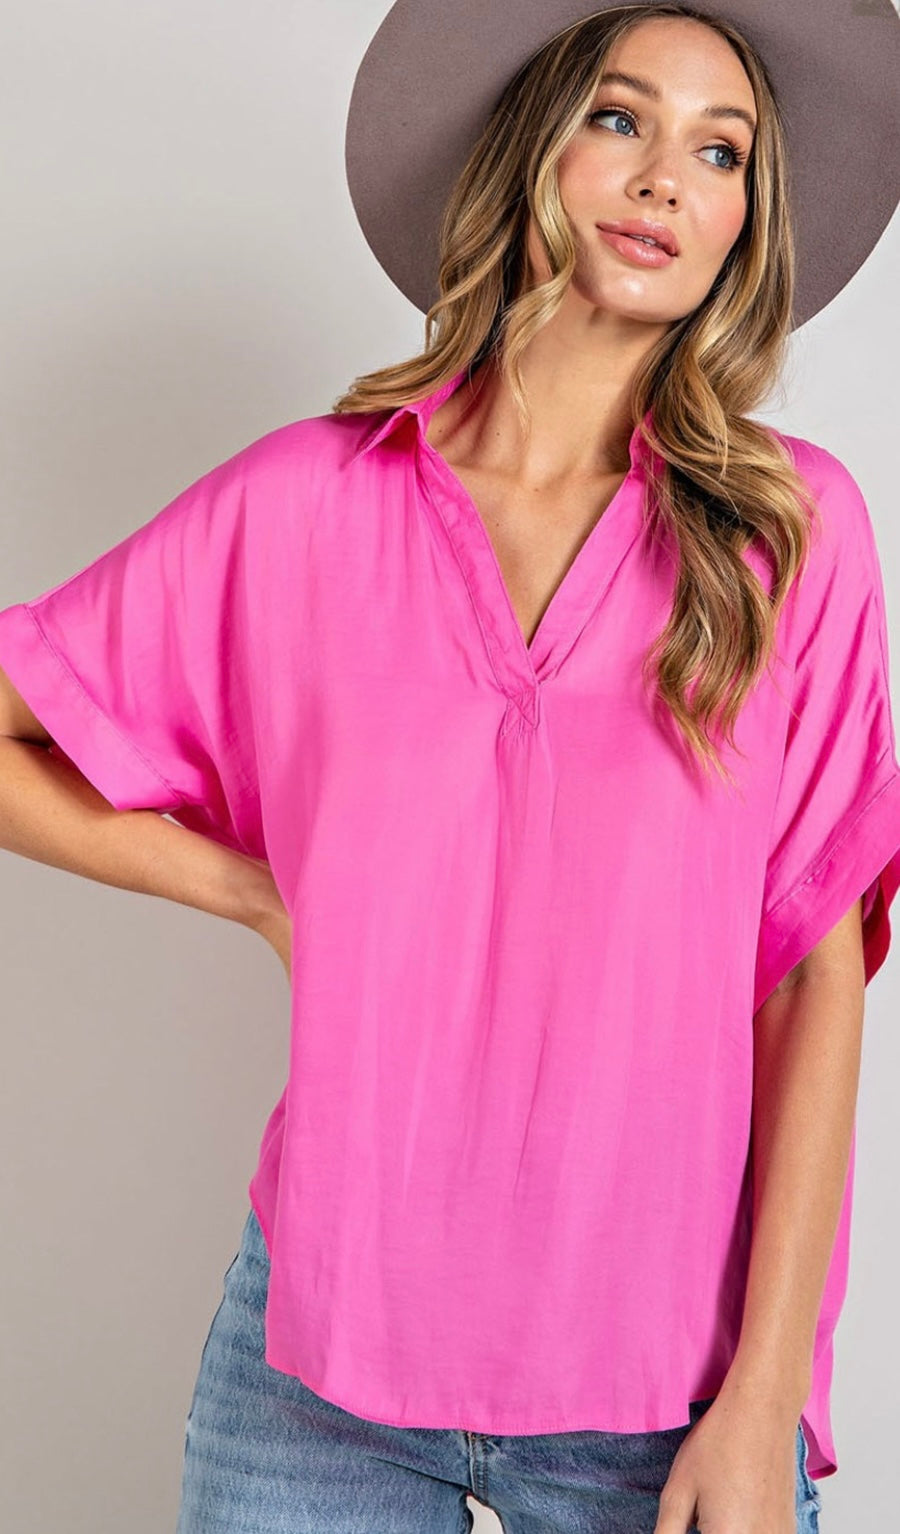 Eesome Candy Pink Short Sleeve Top